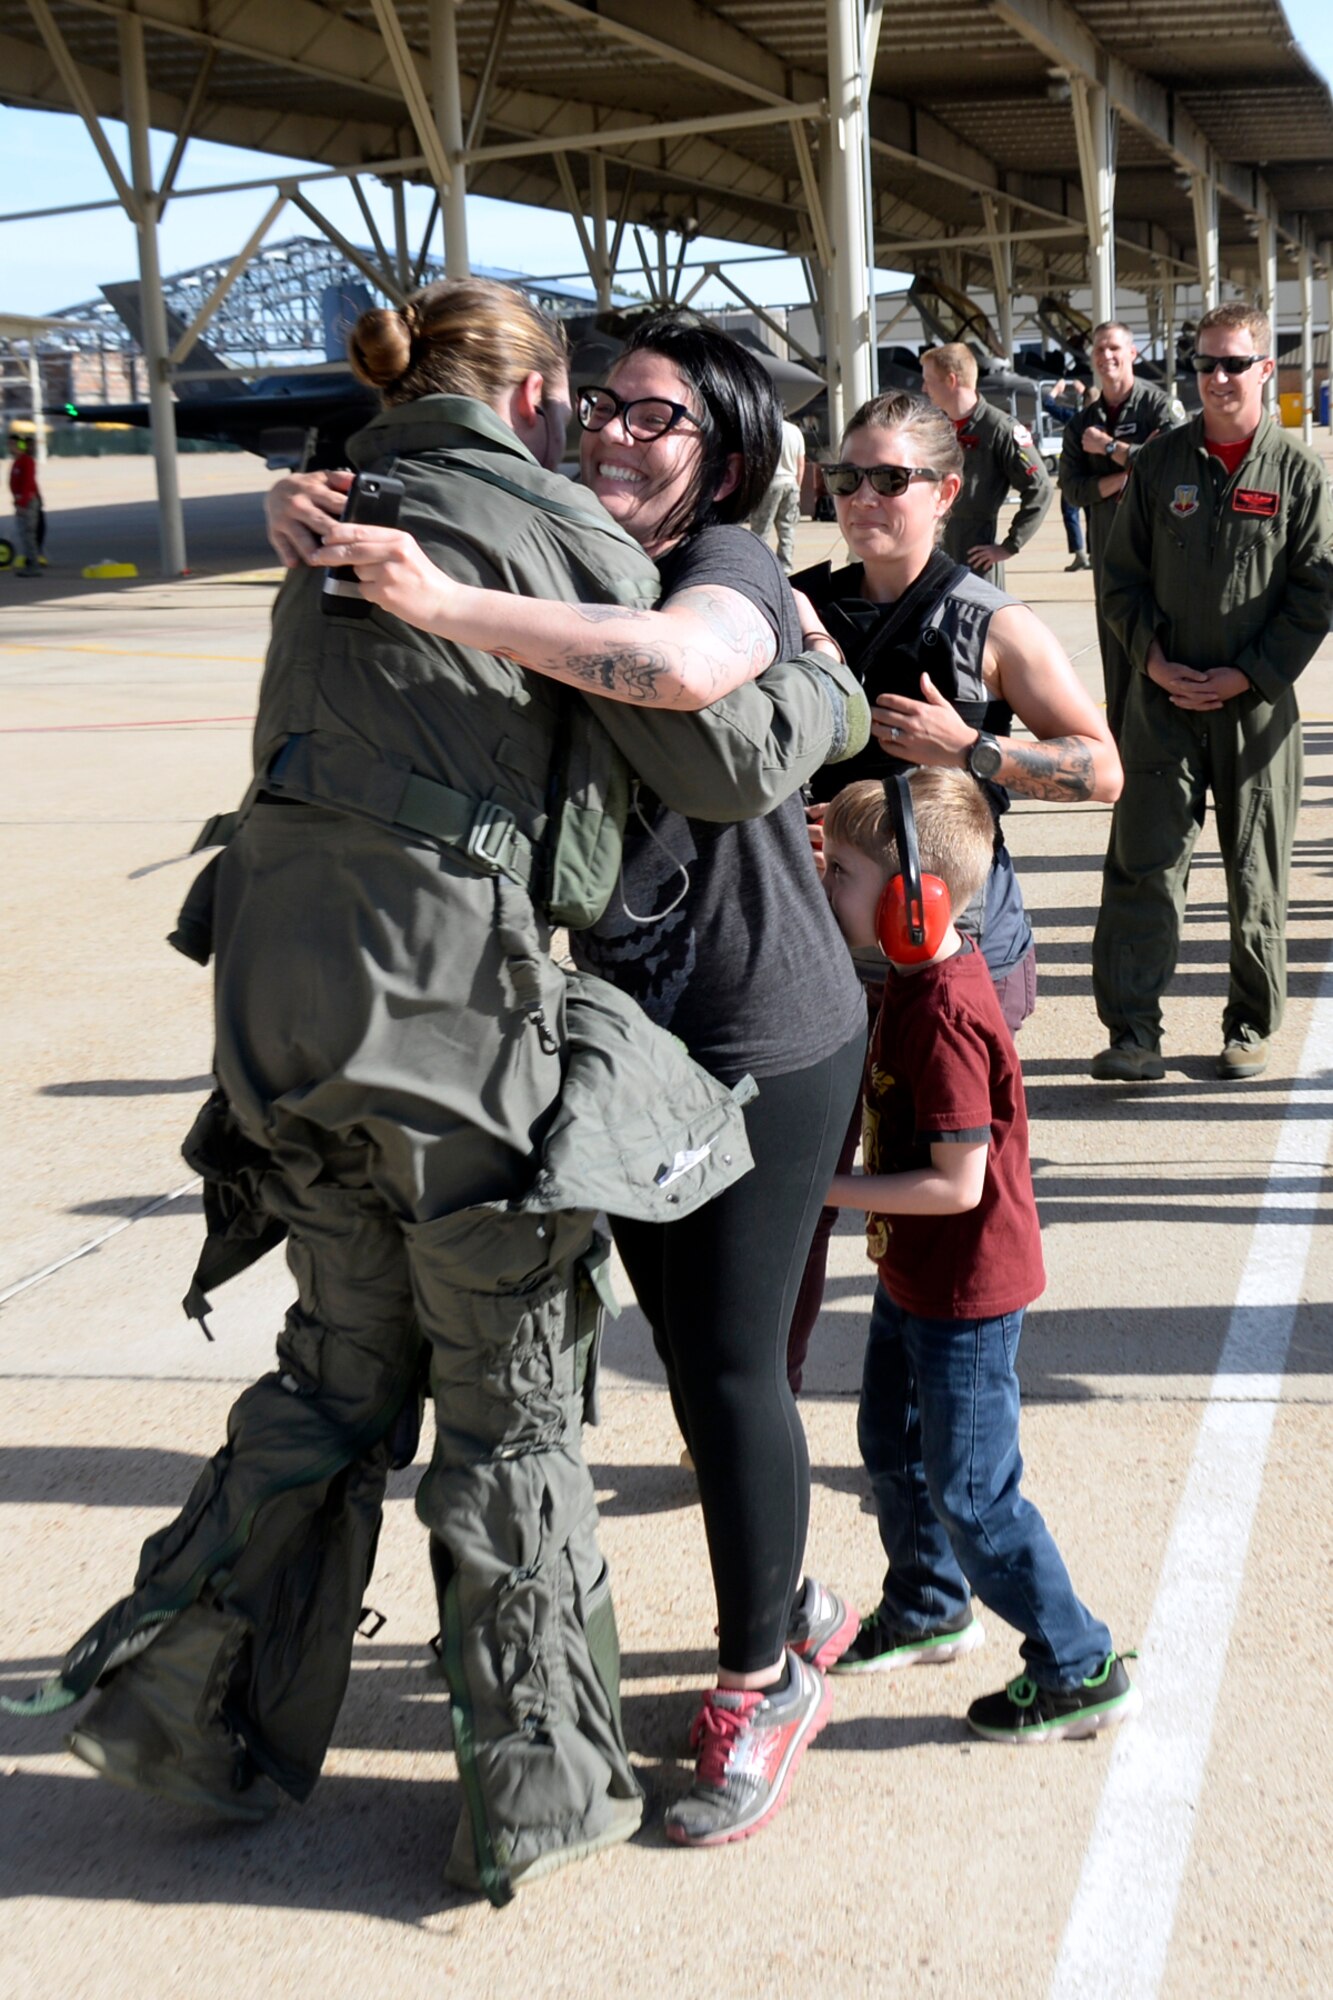 Capt. Kristin Wolfe, 34th Fighter Squadron, is welcomed home by family upon returning from deployment, May 5, 2018, at Hill Air Force Base, Utah. (U.S. Air Force photo by Todd Cromar)